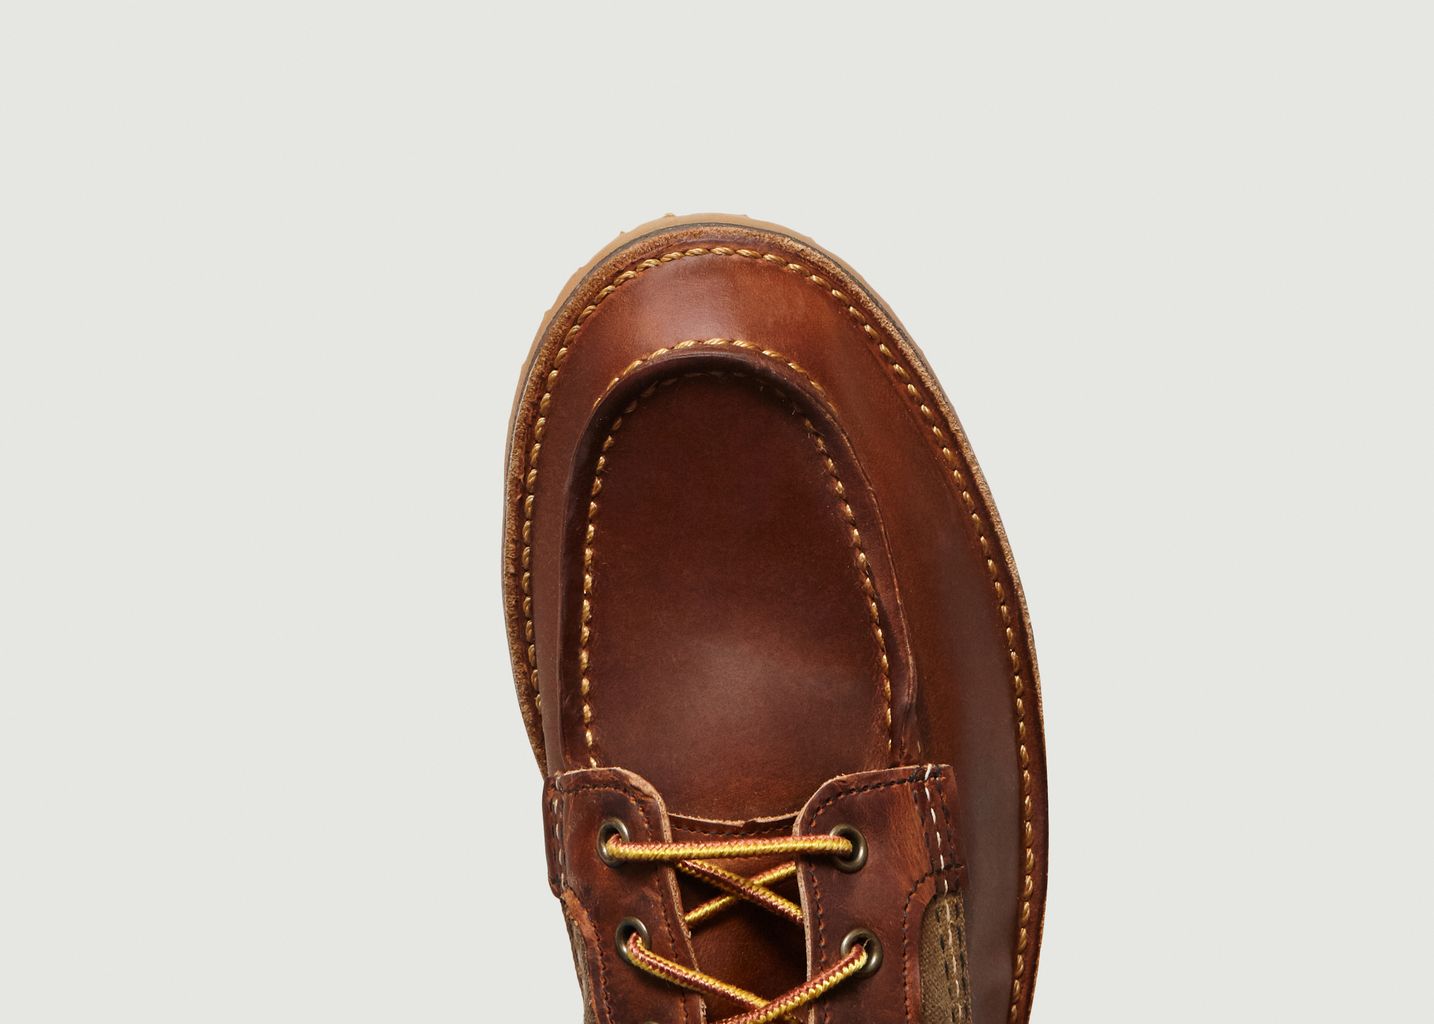 red wing chukka boots sale